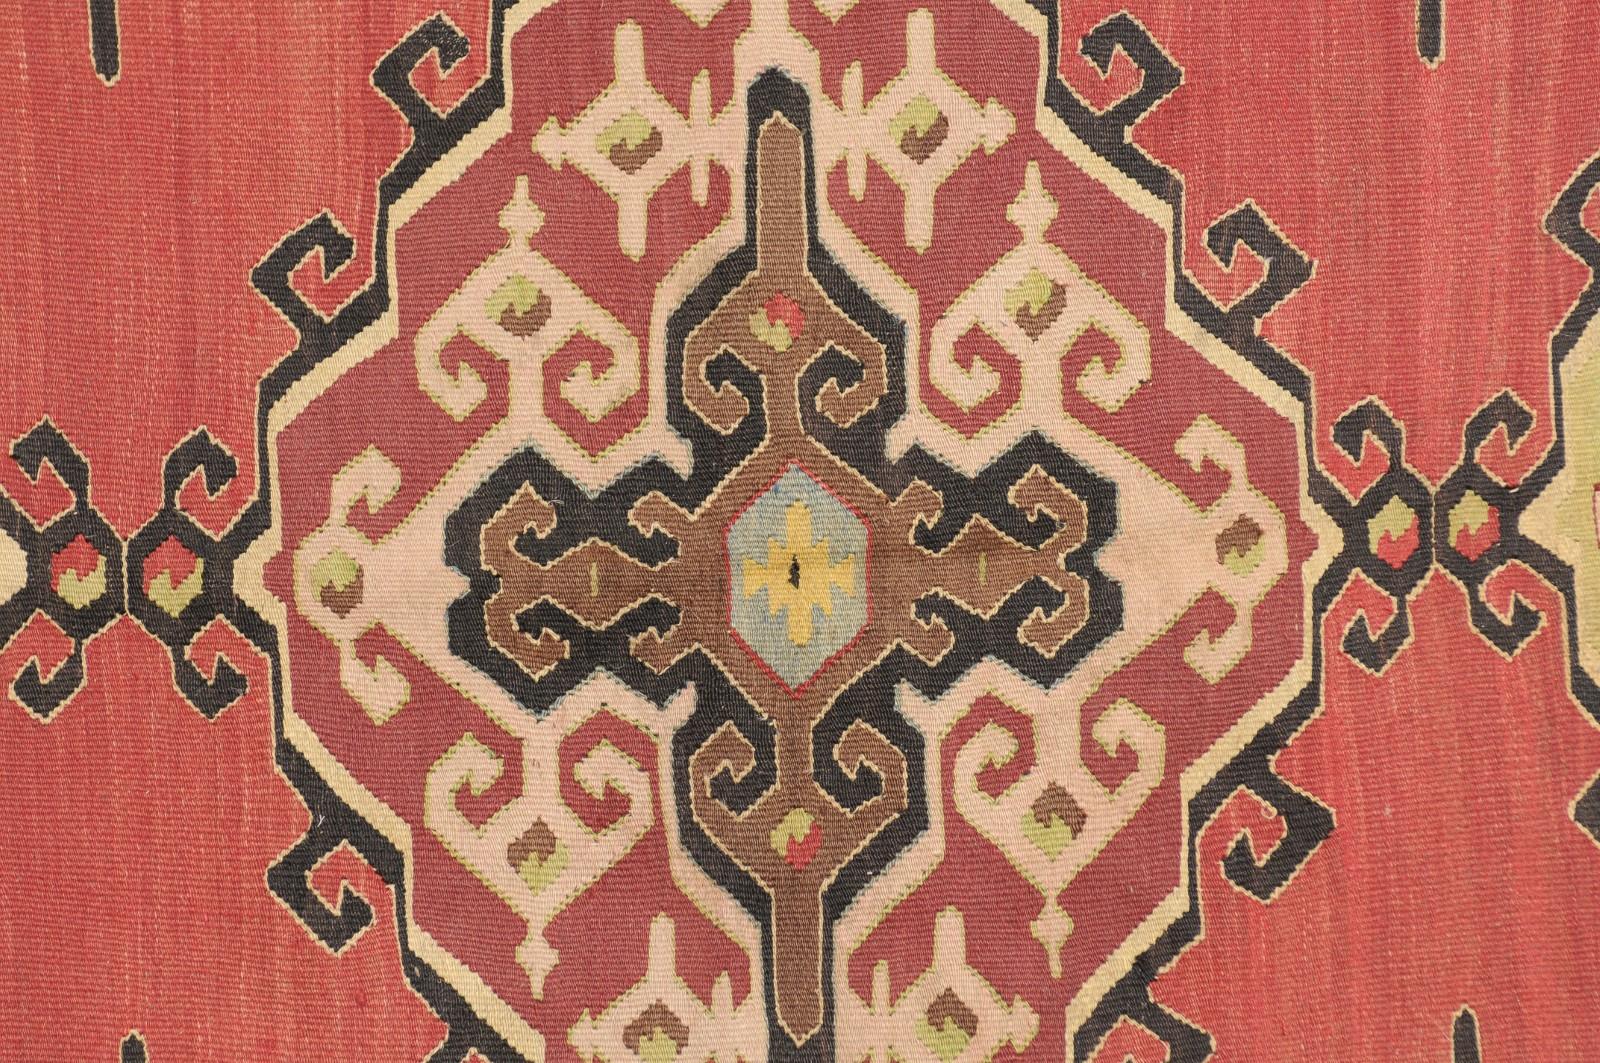 20th Century Flatweave Area Rug in Reds, Tans, & Black featuring Floral Border For Sale